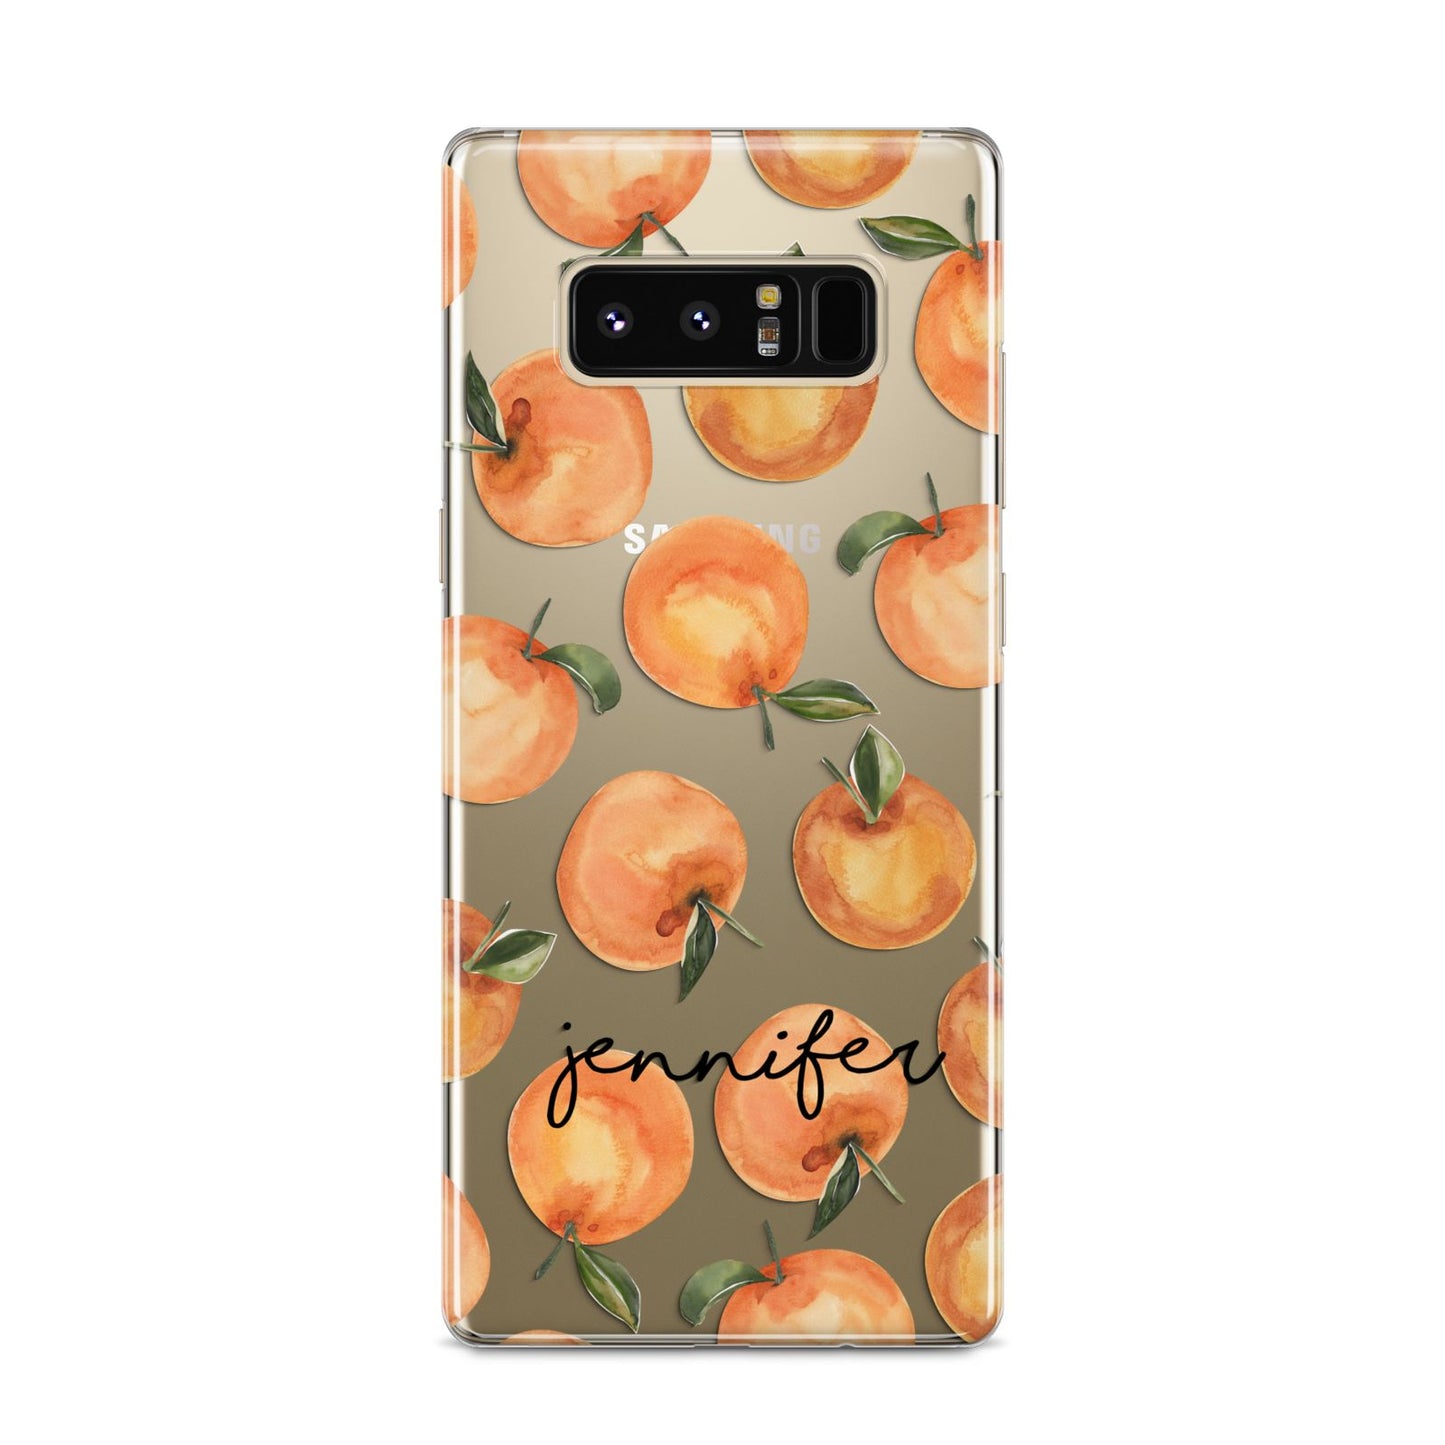 Personalised Oranges Name Samsung Galaxy S8 Case